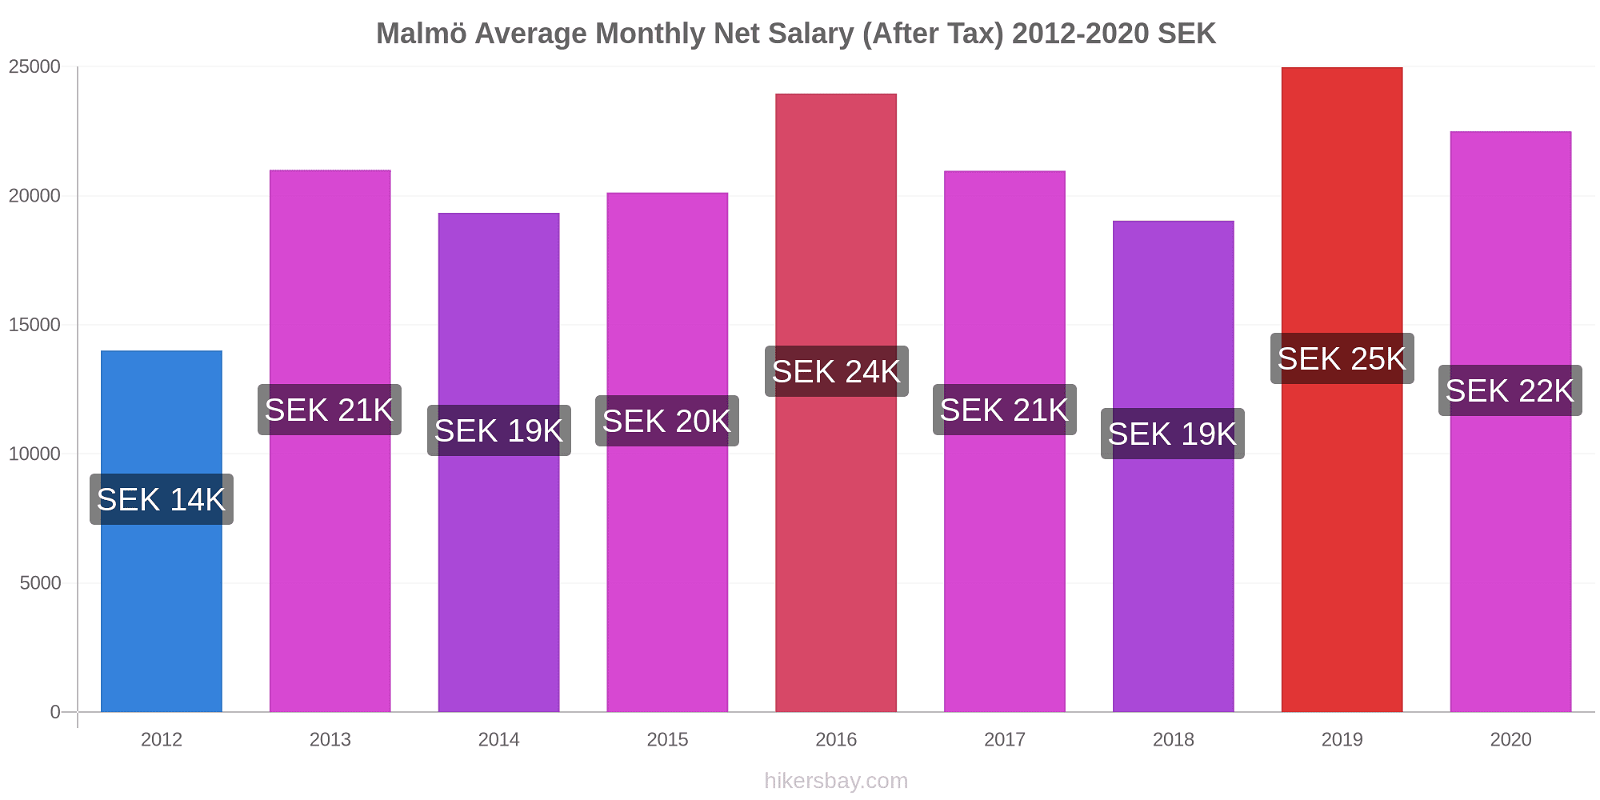 Malmö price changes Average Monthly Net Salary (After Tax) hikersbay.com